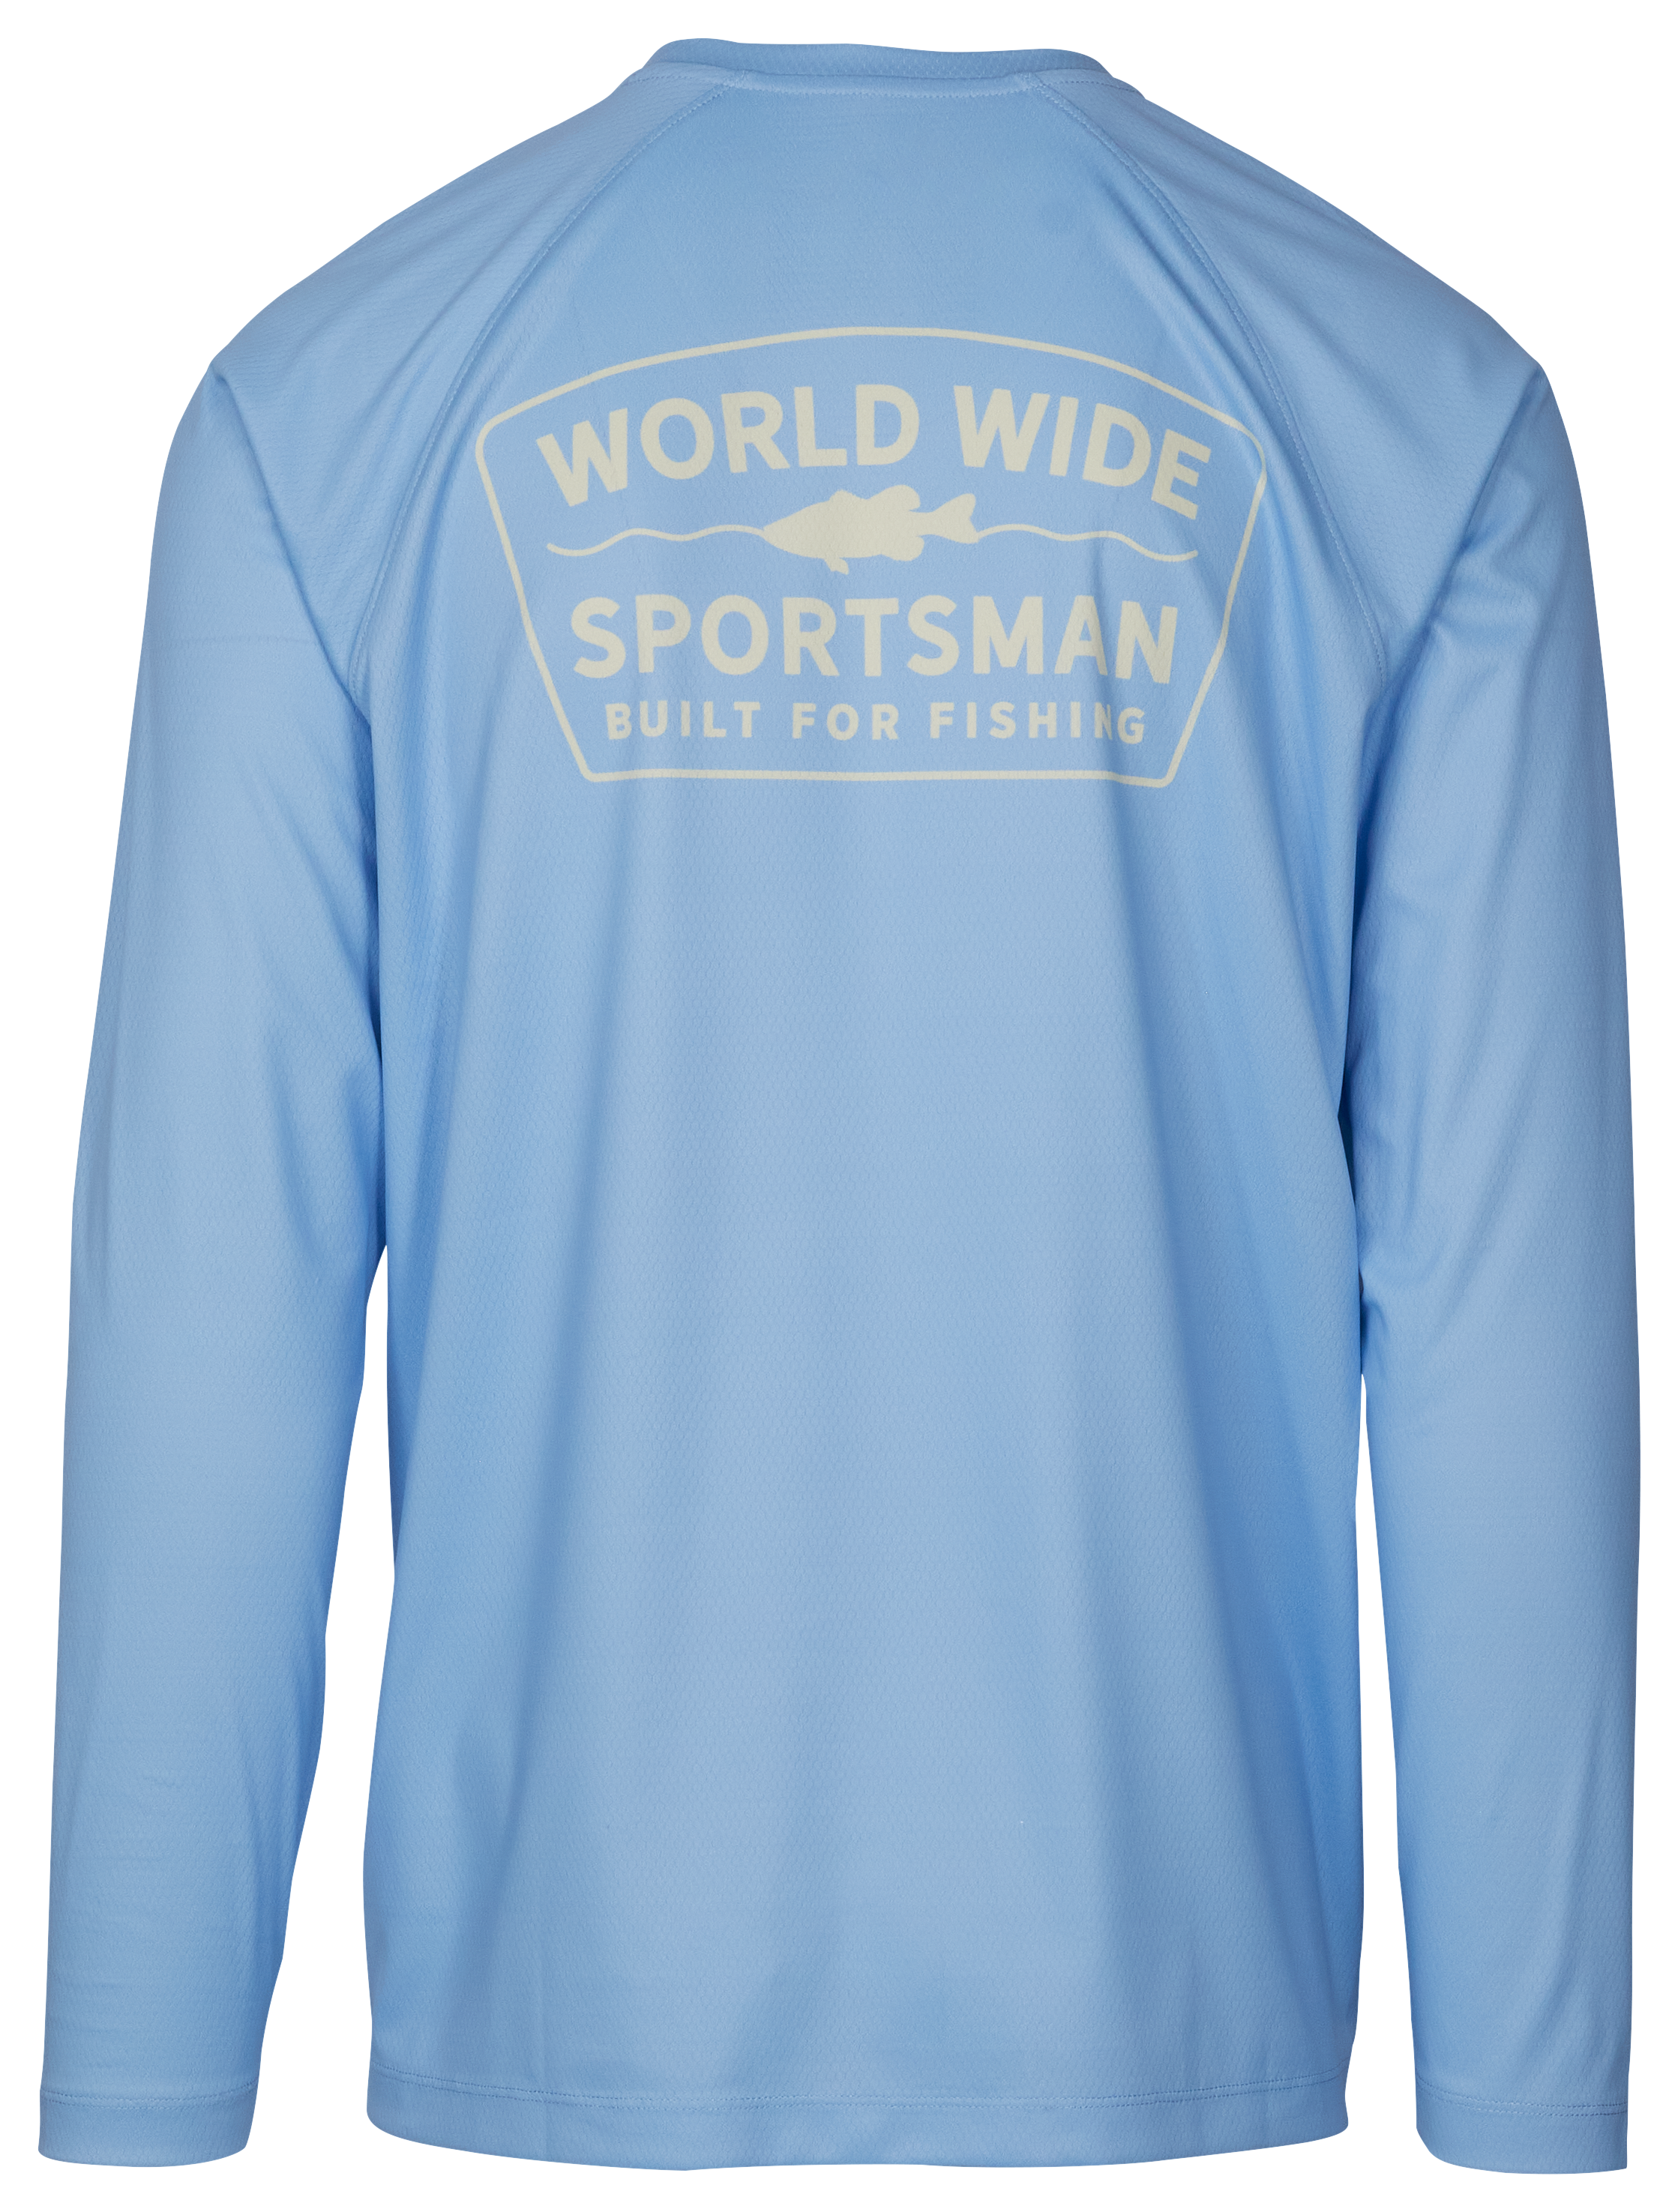 Outdoor Life World wide sportsman Fly Fishing tee